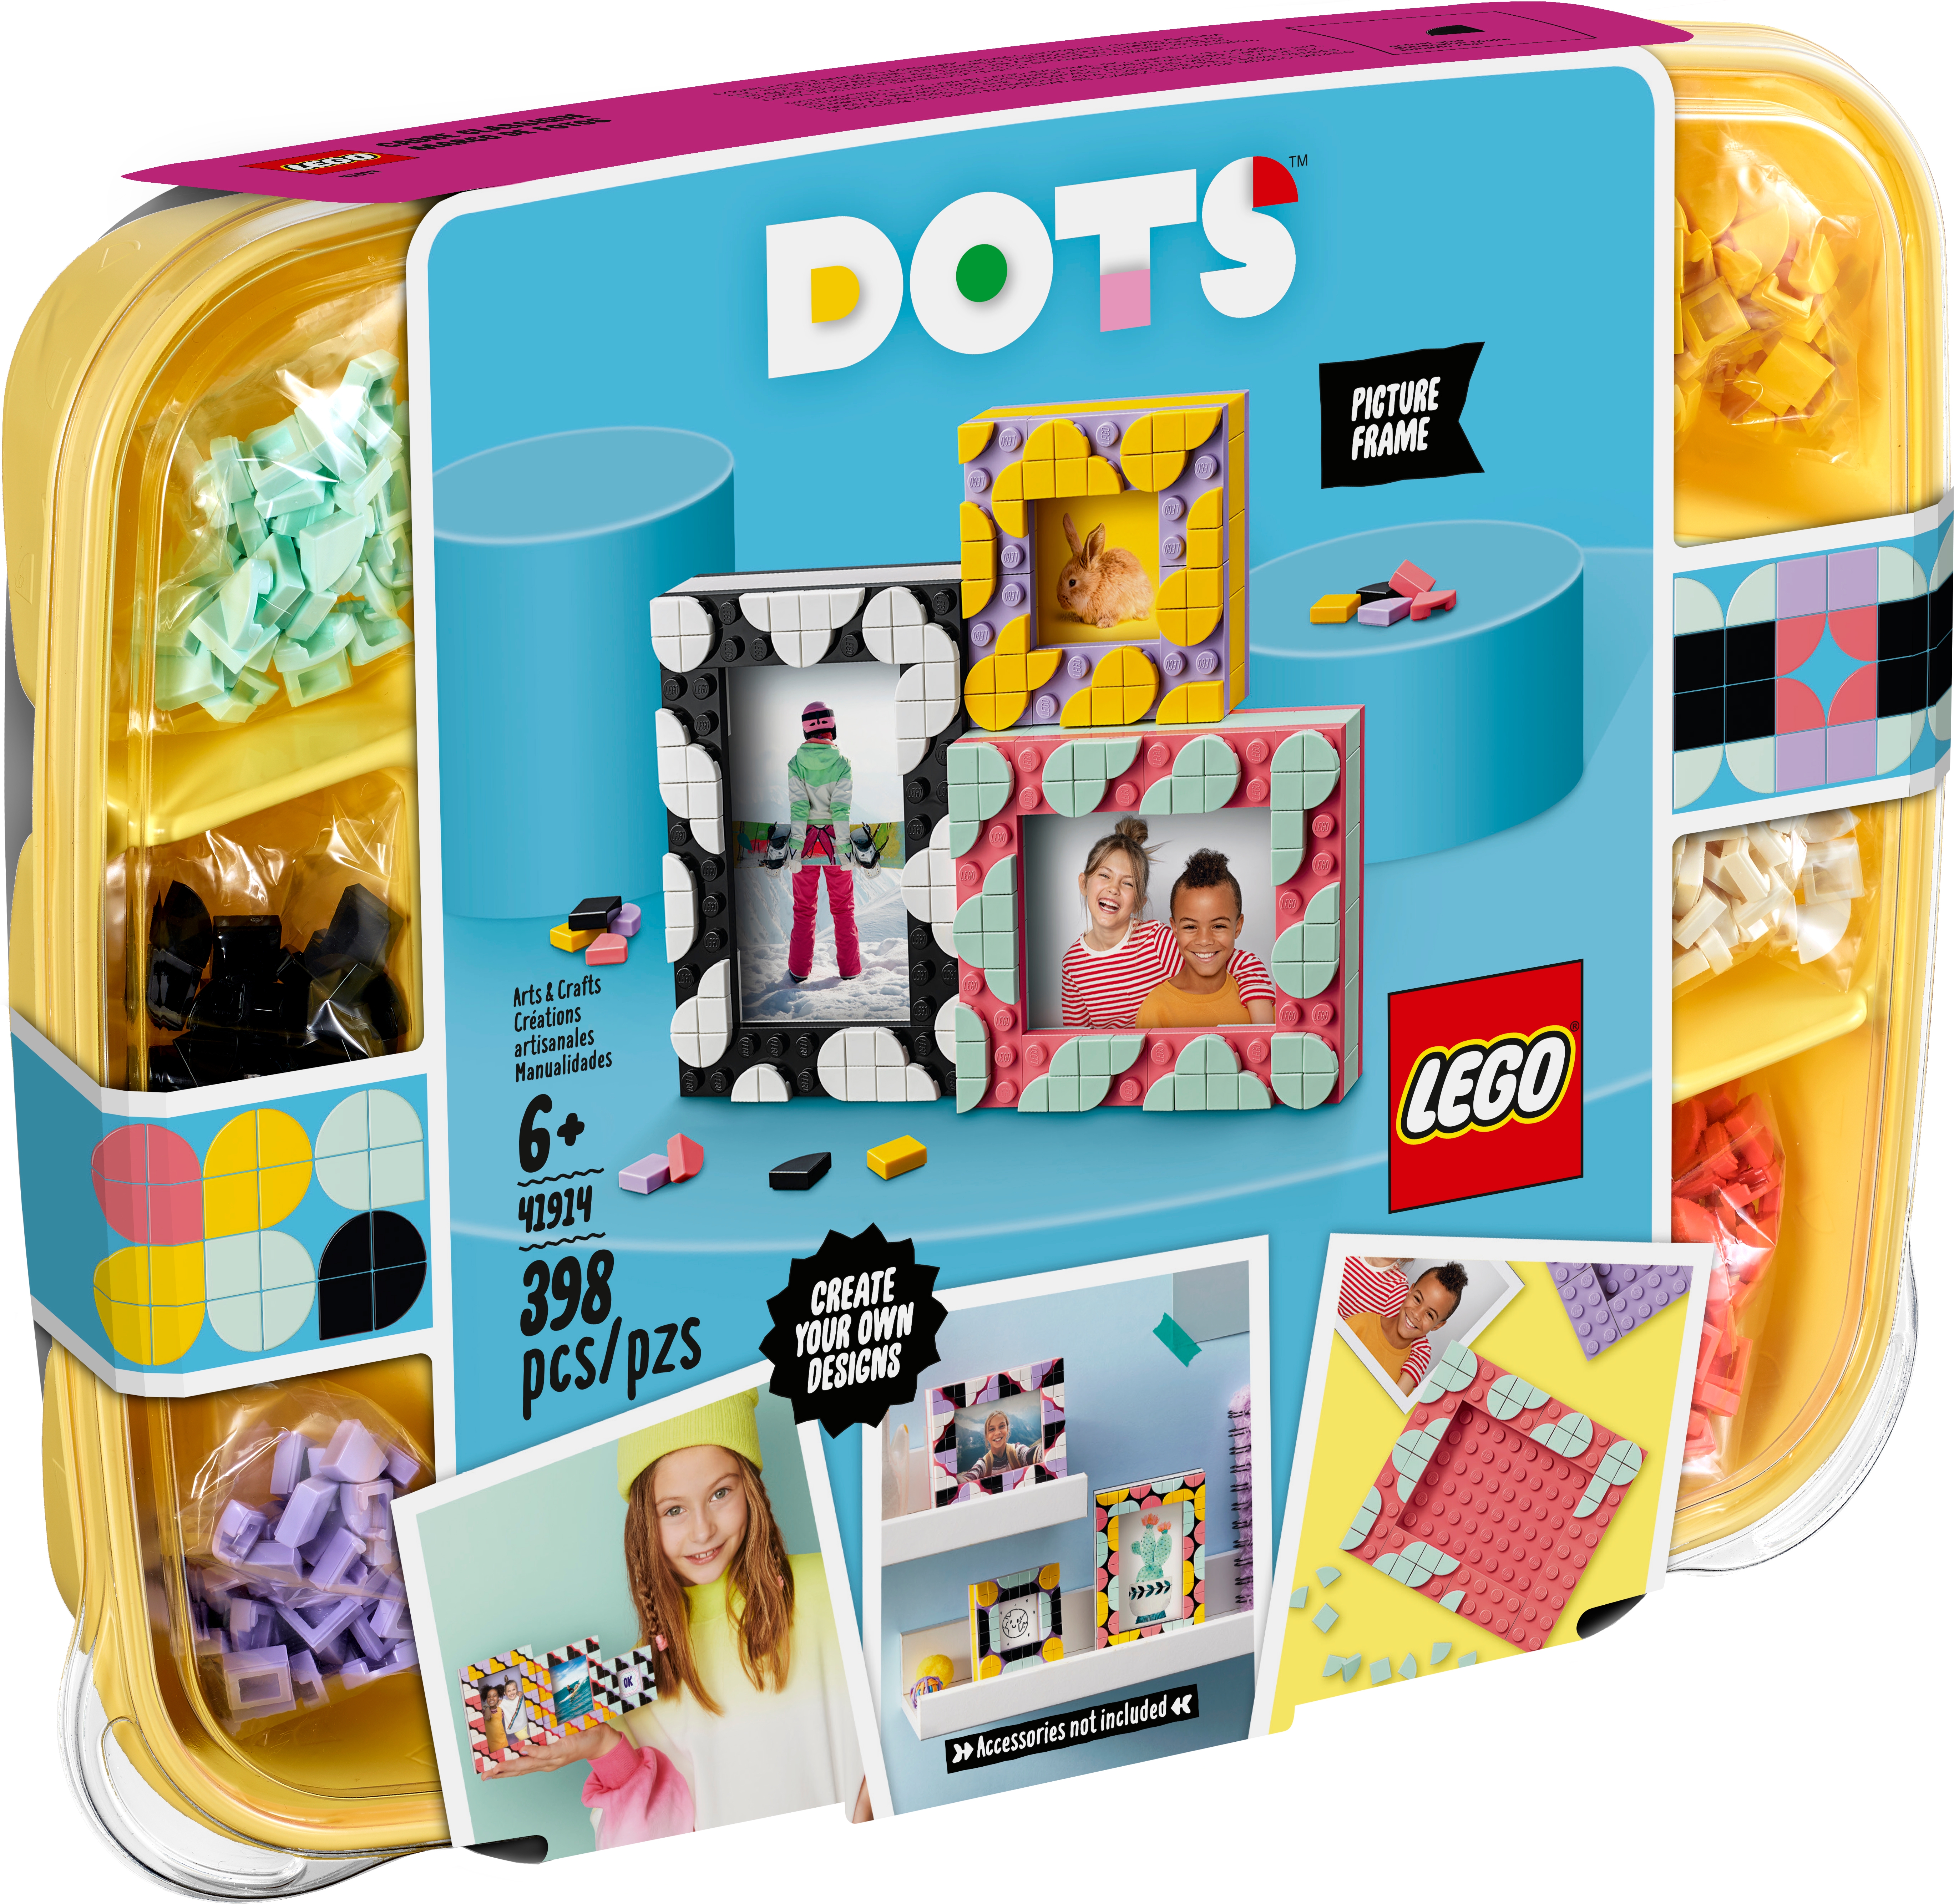 New Toy Brick Creative Picture Frames 41914 LEGO® DOTS 